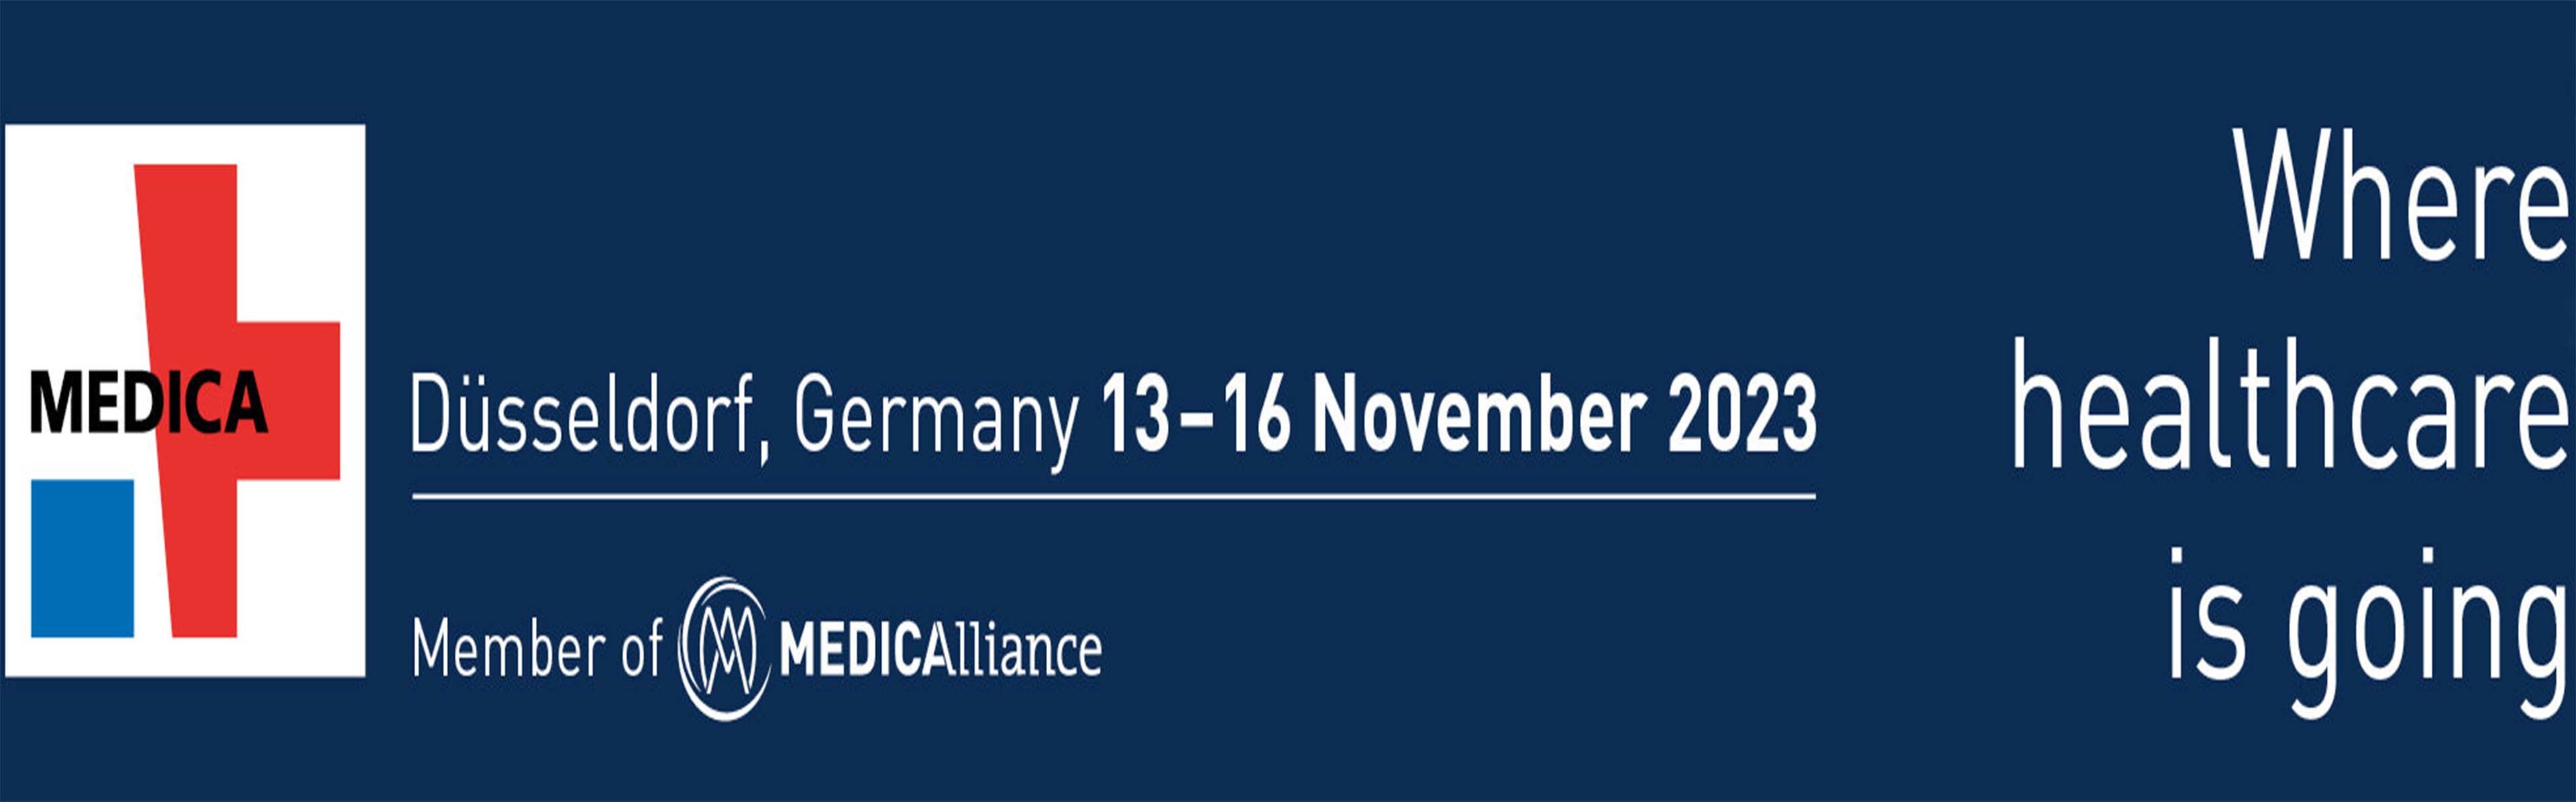 Germany medica11.13-16 (booth number not available)